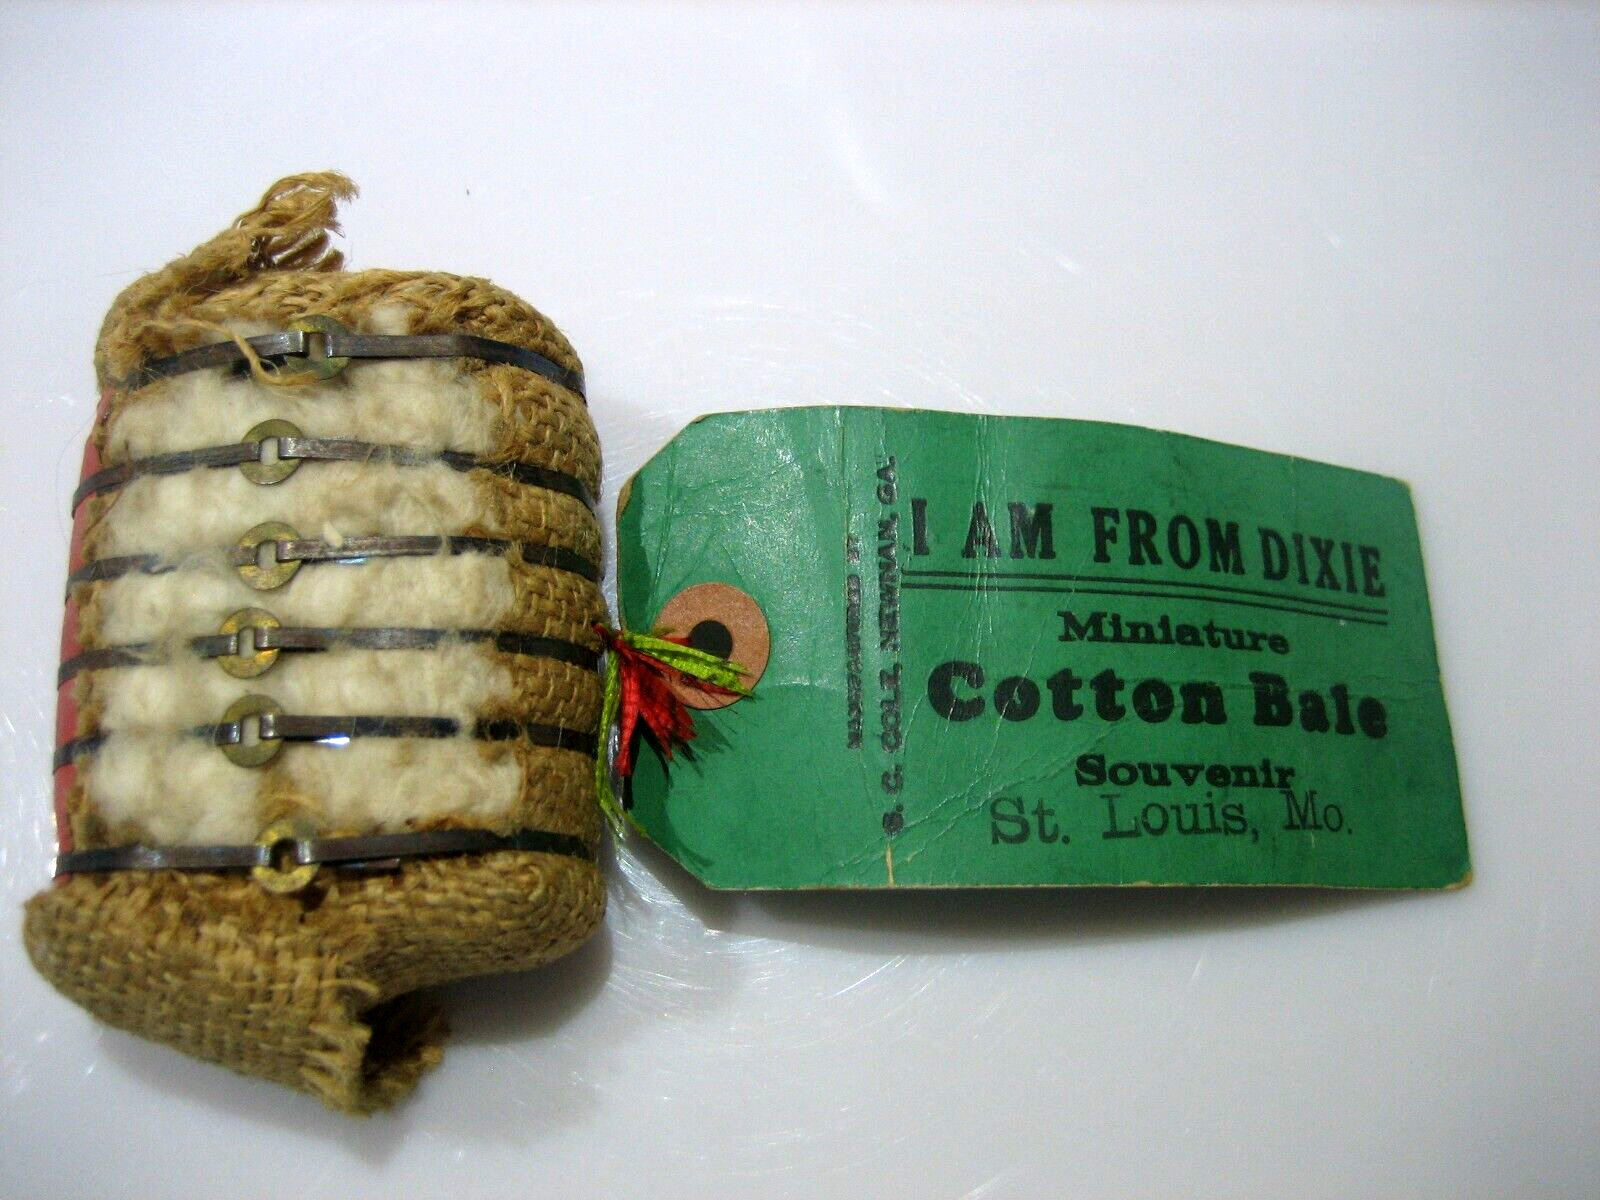 VINTAGE 1930'S MINIATURE COTTON BALE ST. LOUIS, MO WITH JEFFERSON POSTAGE STAMP